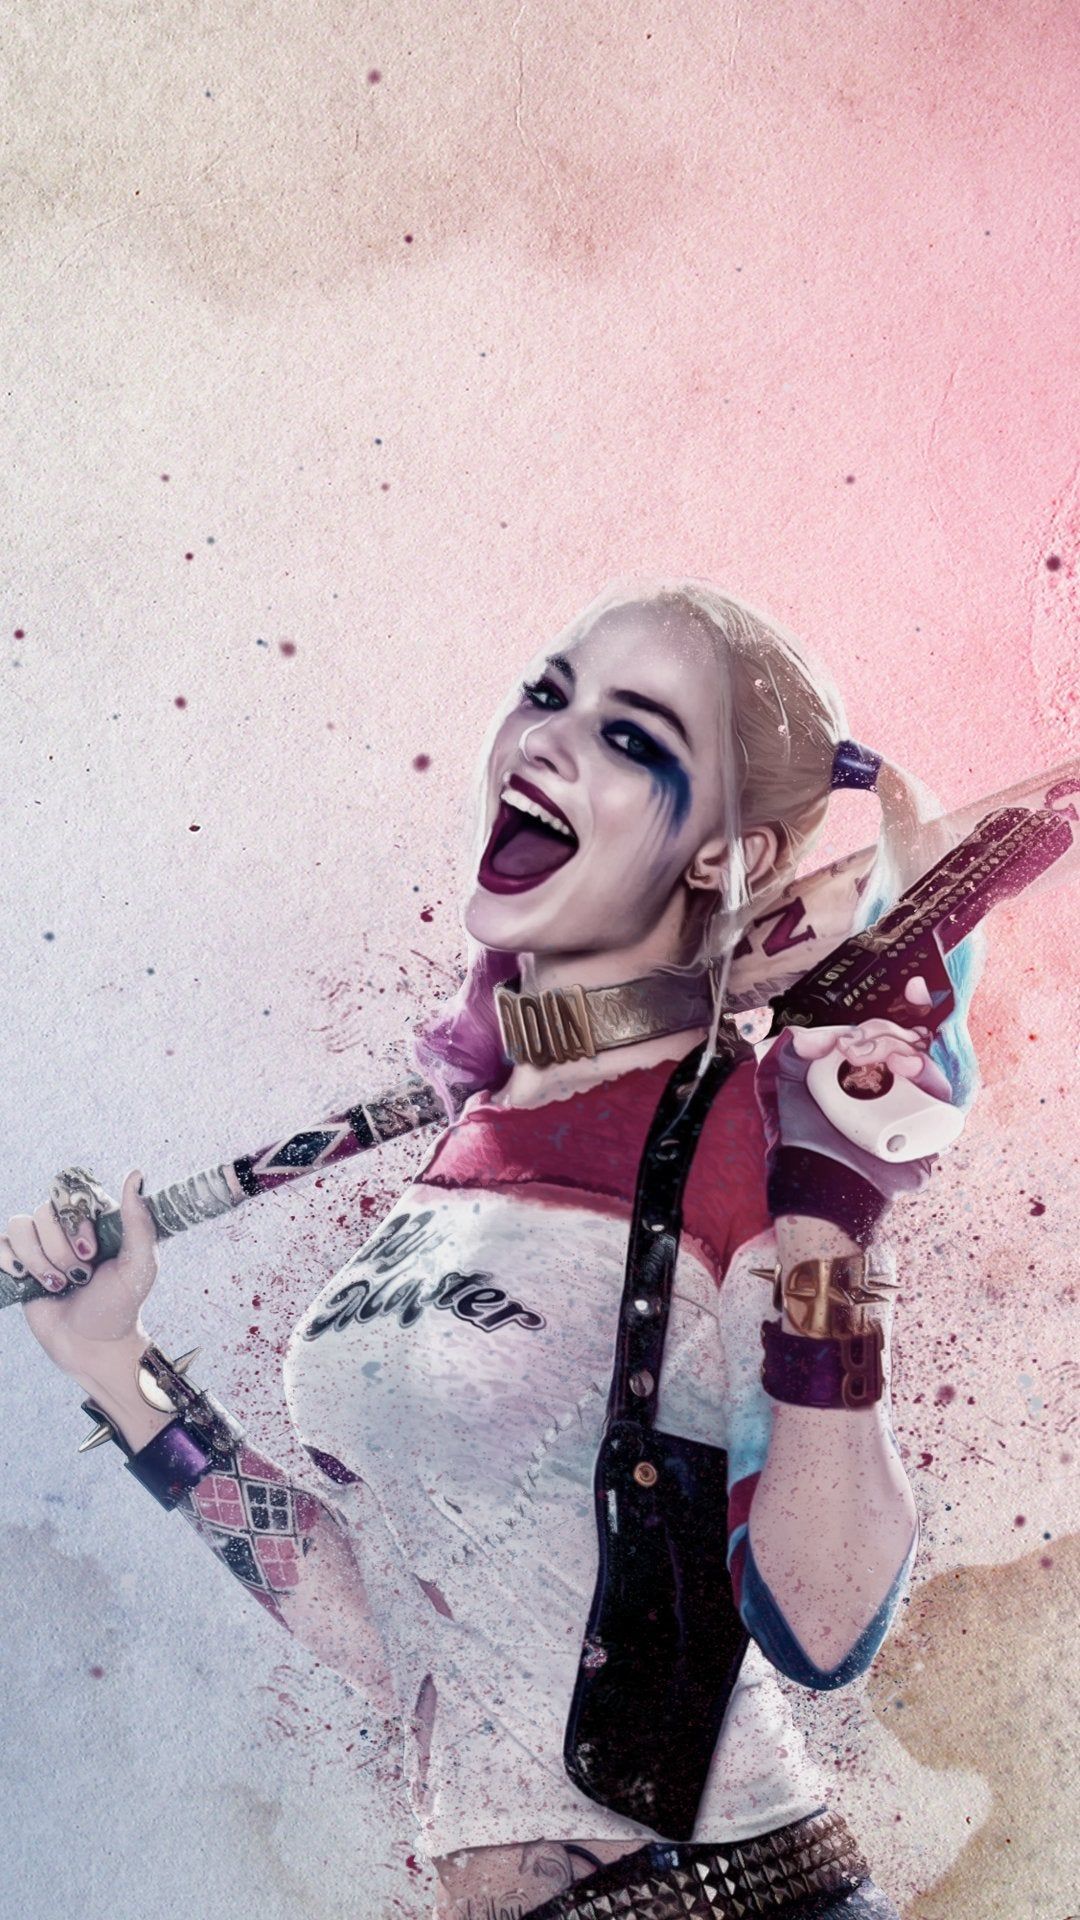 Suicide Squad Harley Quinn iPhone Wallpaper Free Suicide Squad Harley Quinn iPhone Background